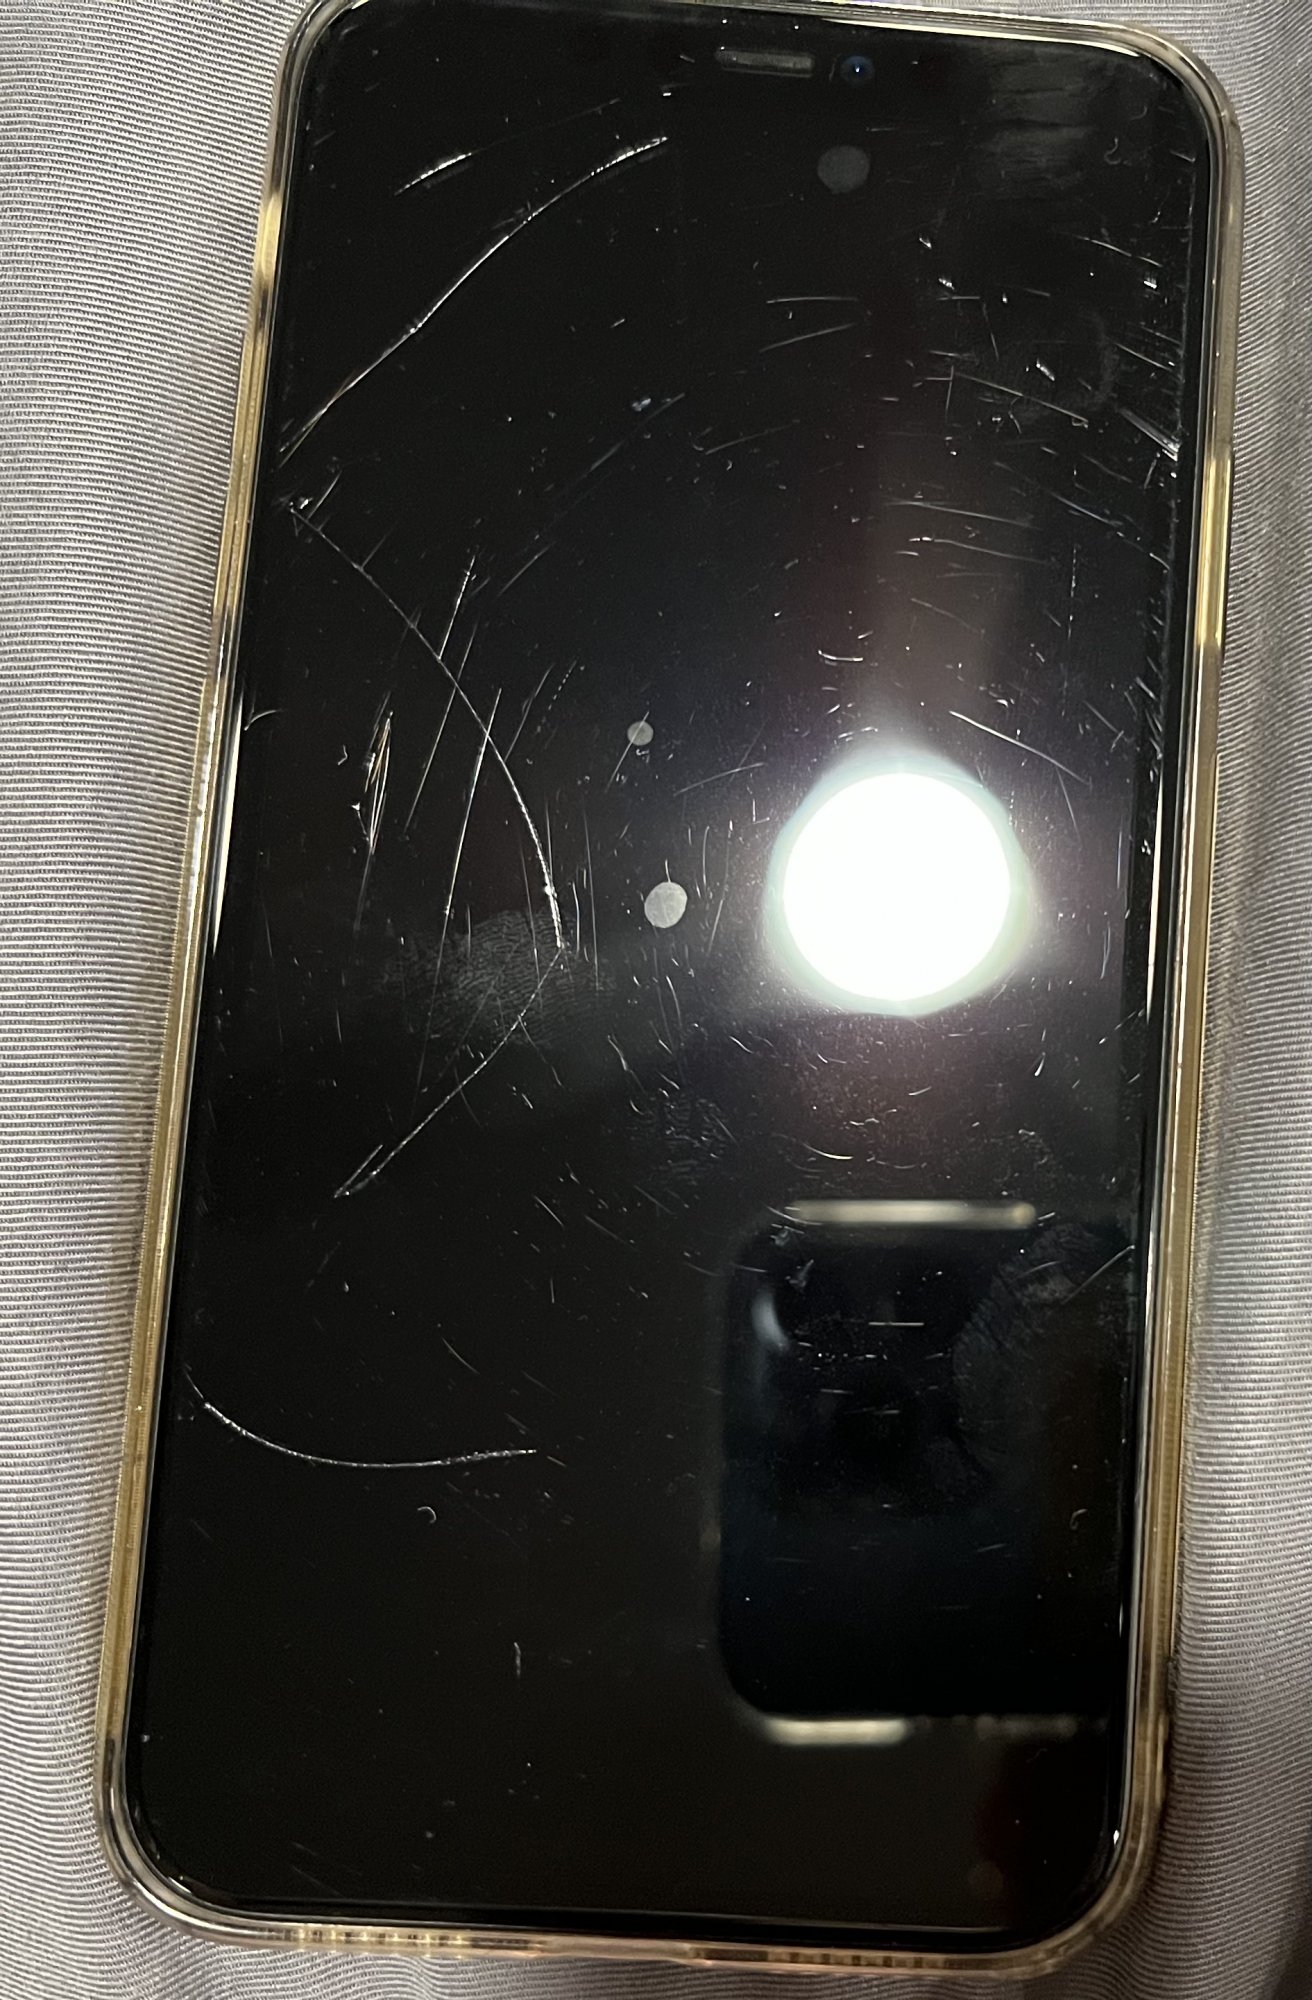 Why do new iPhone screens scratch so easily?